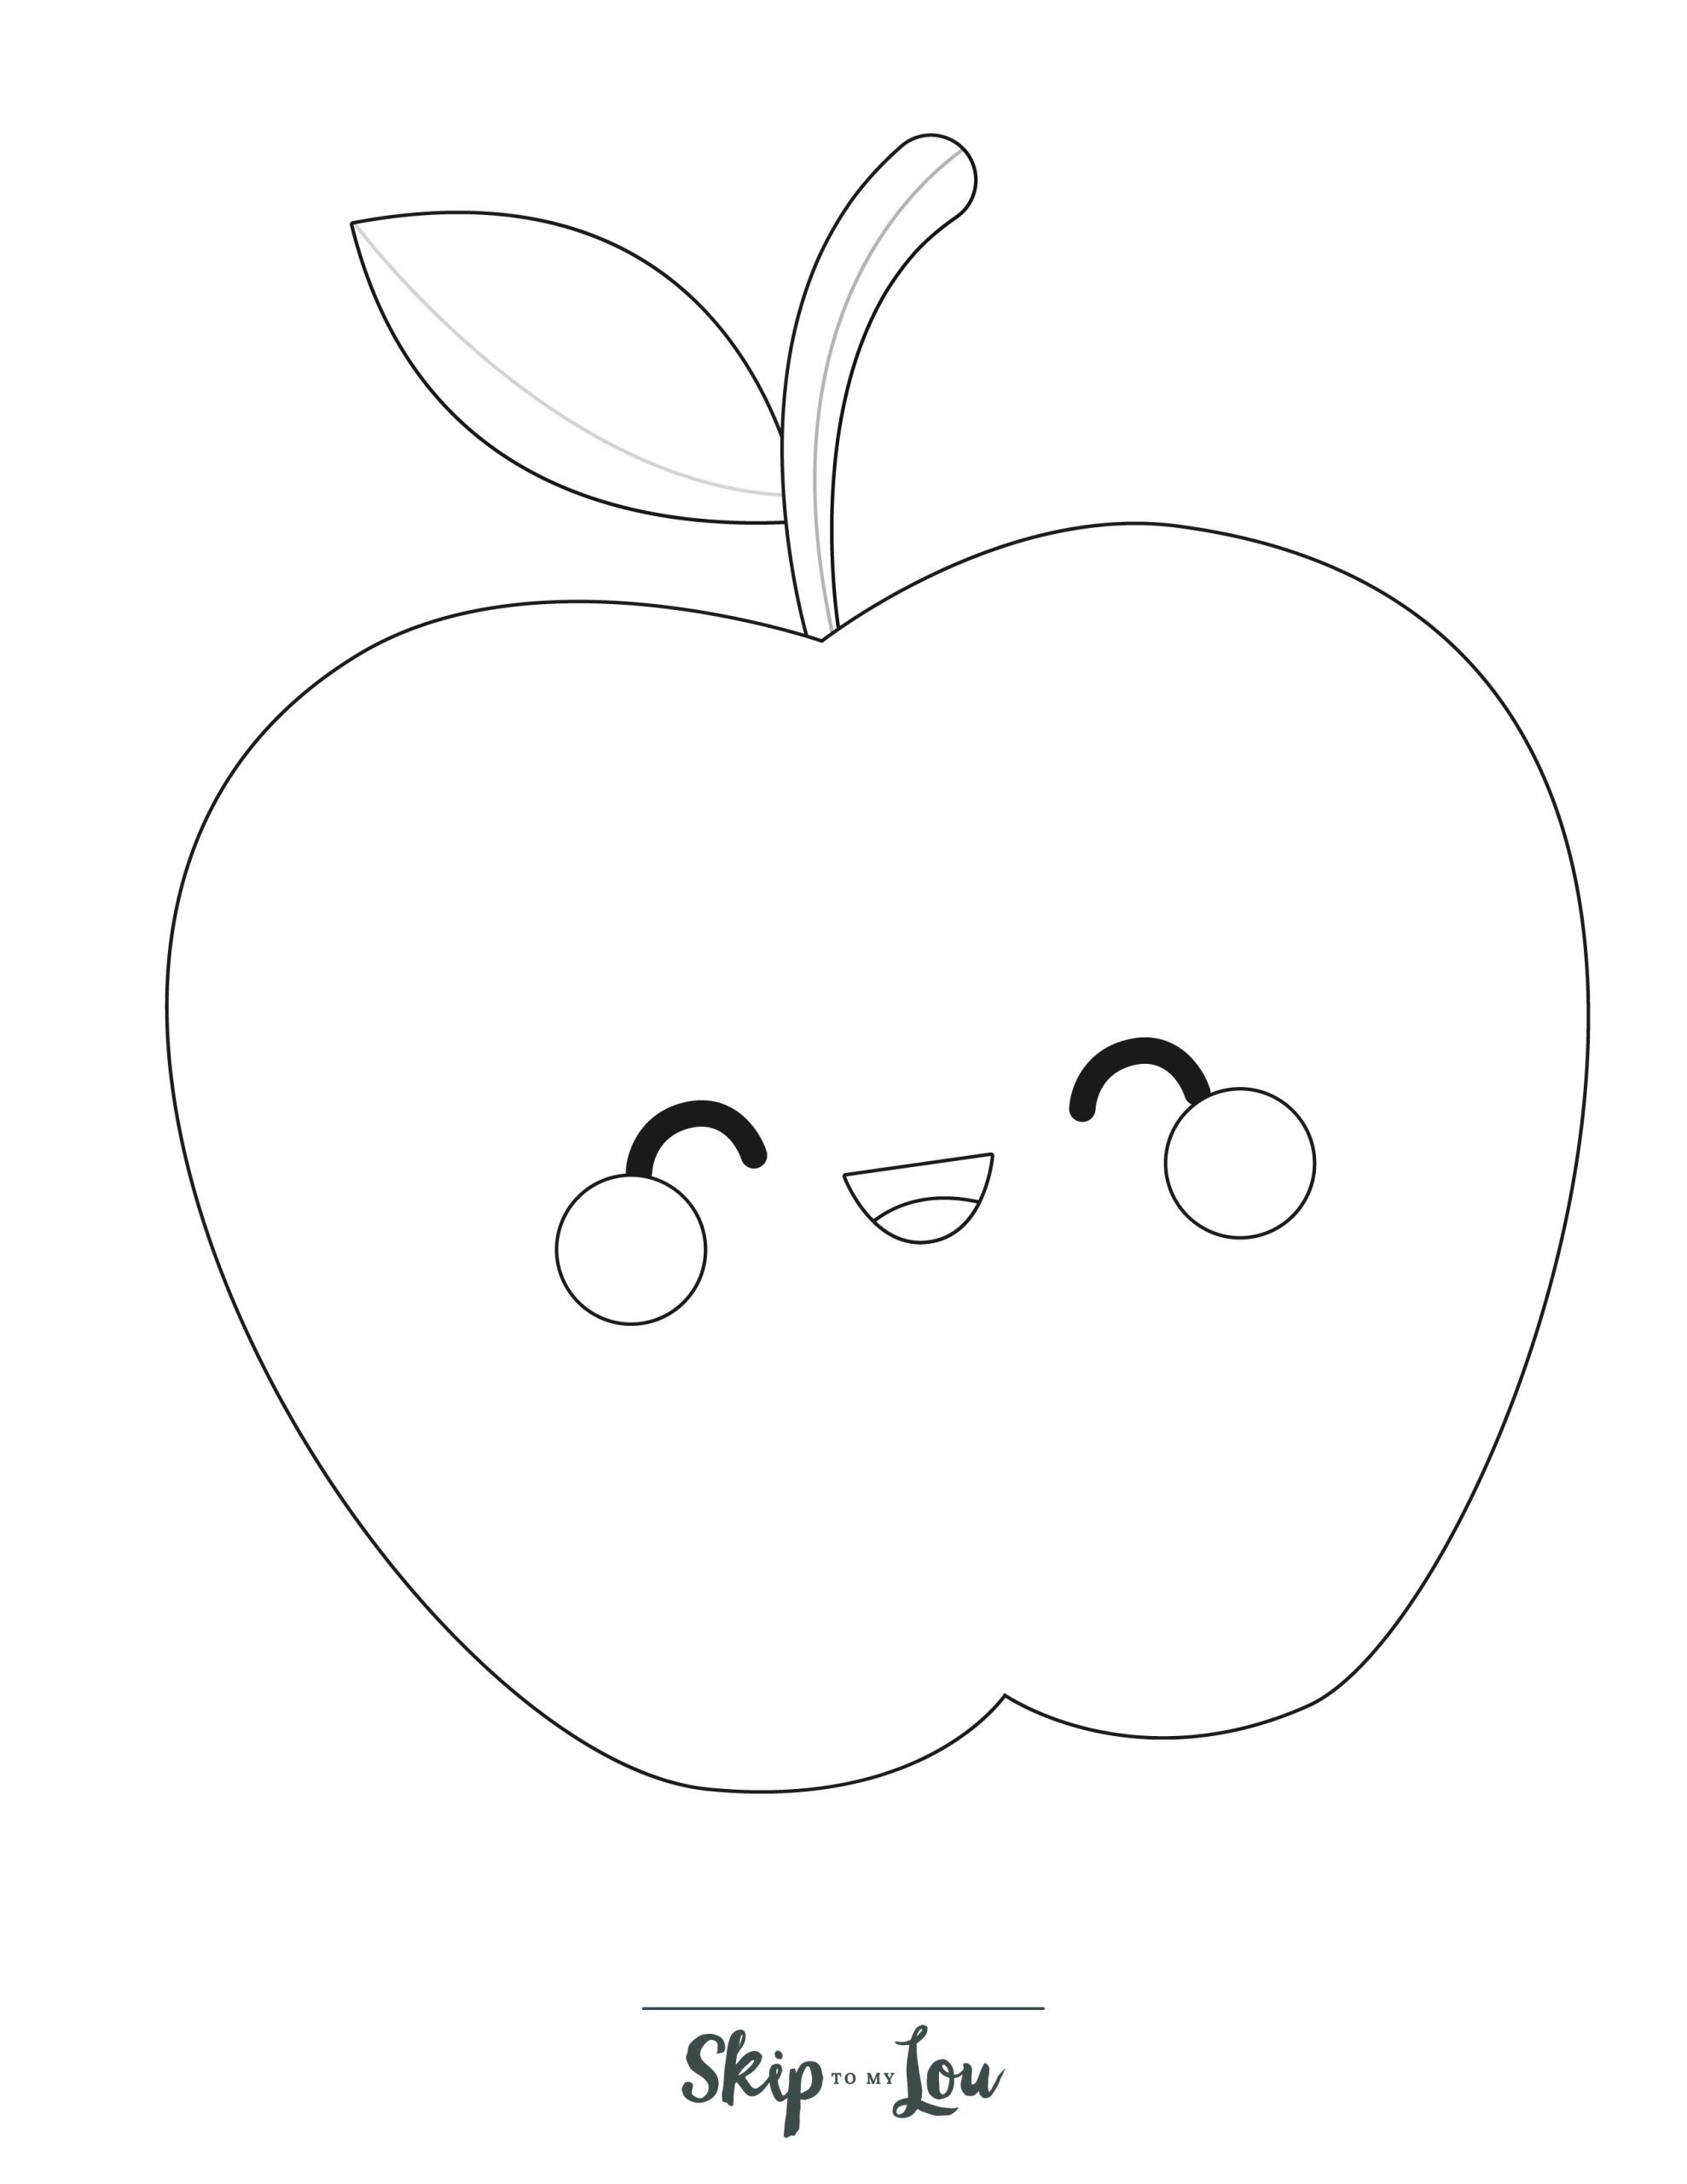 Preschool Coloring Page 10 - Simple line drawing of an apple with a face